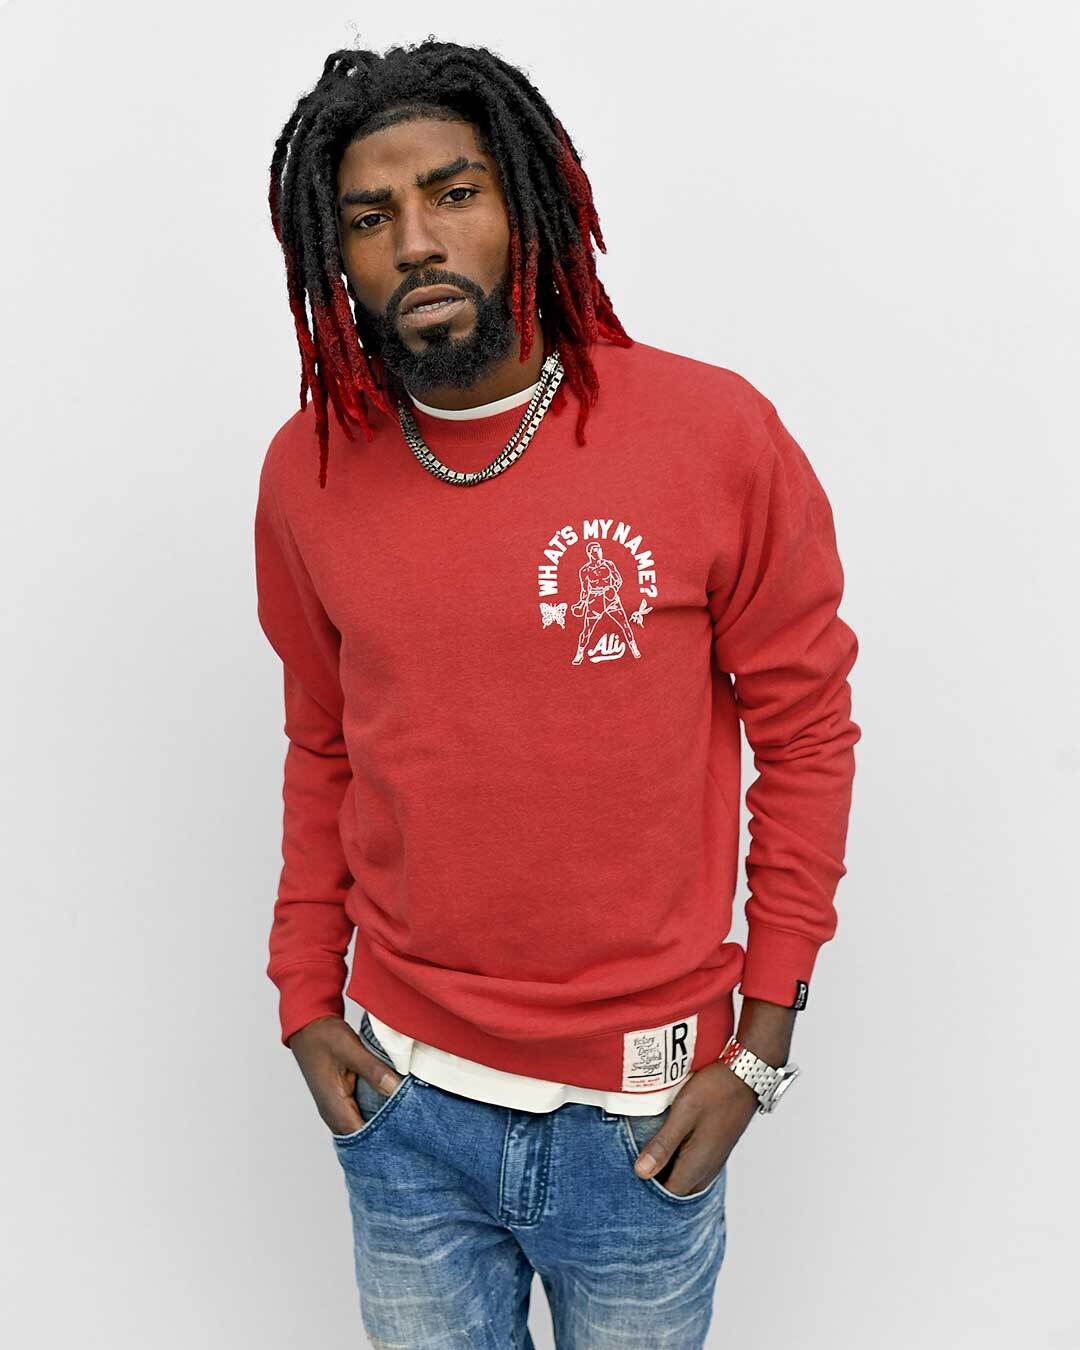 Ali "What's My Name" Red Sweatshirt - Roots of Fight